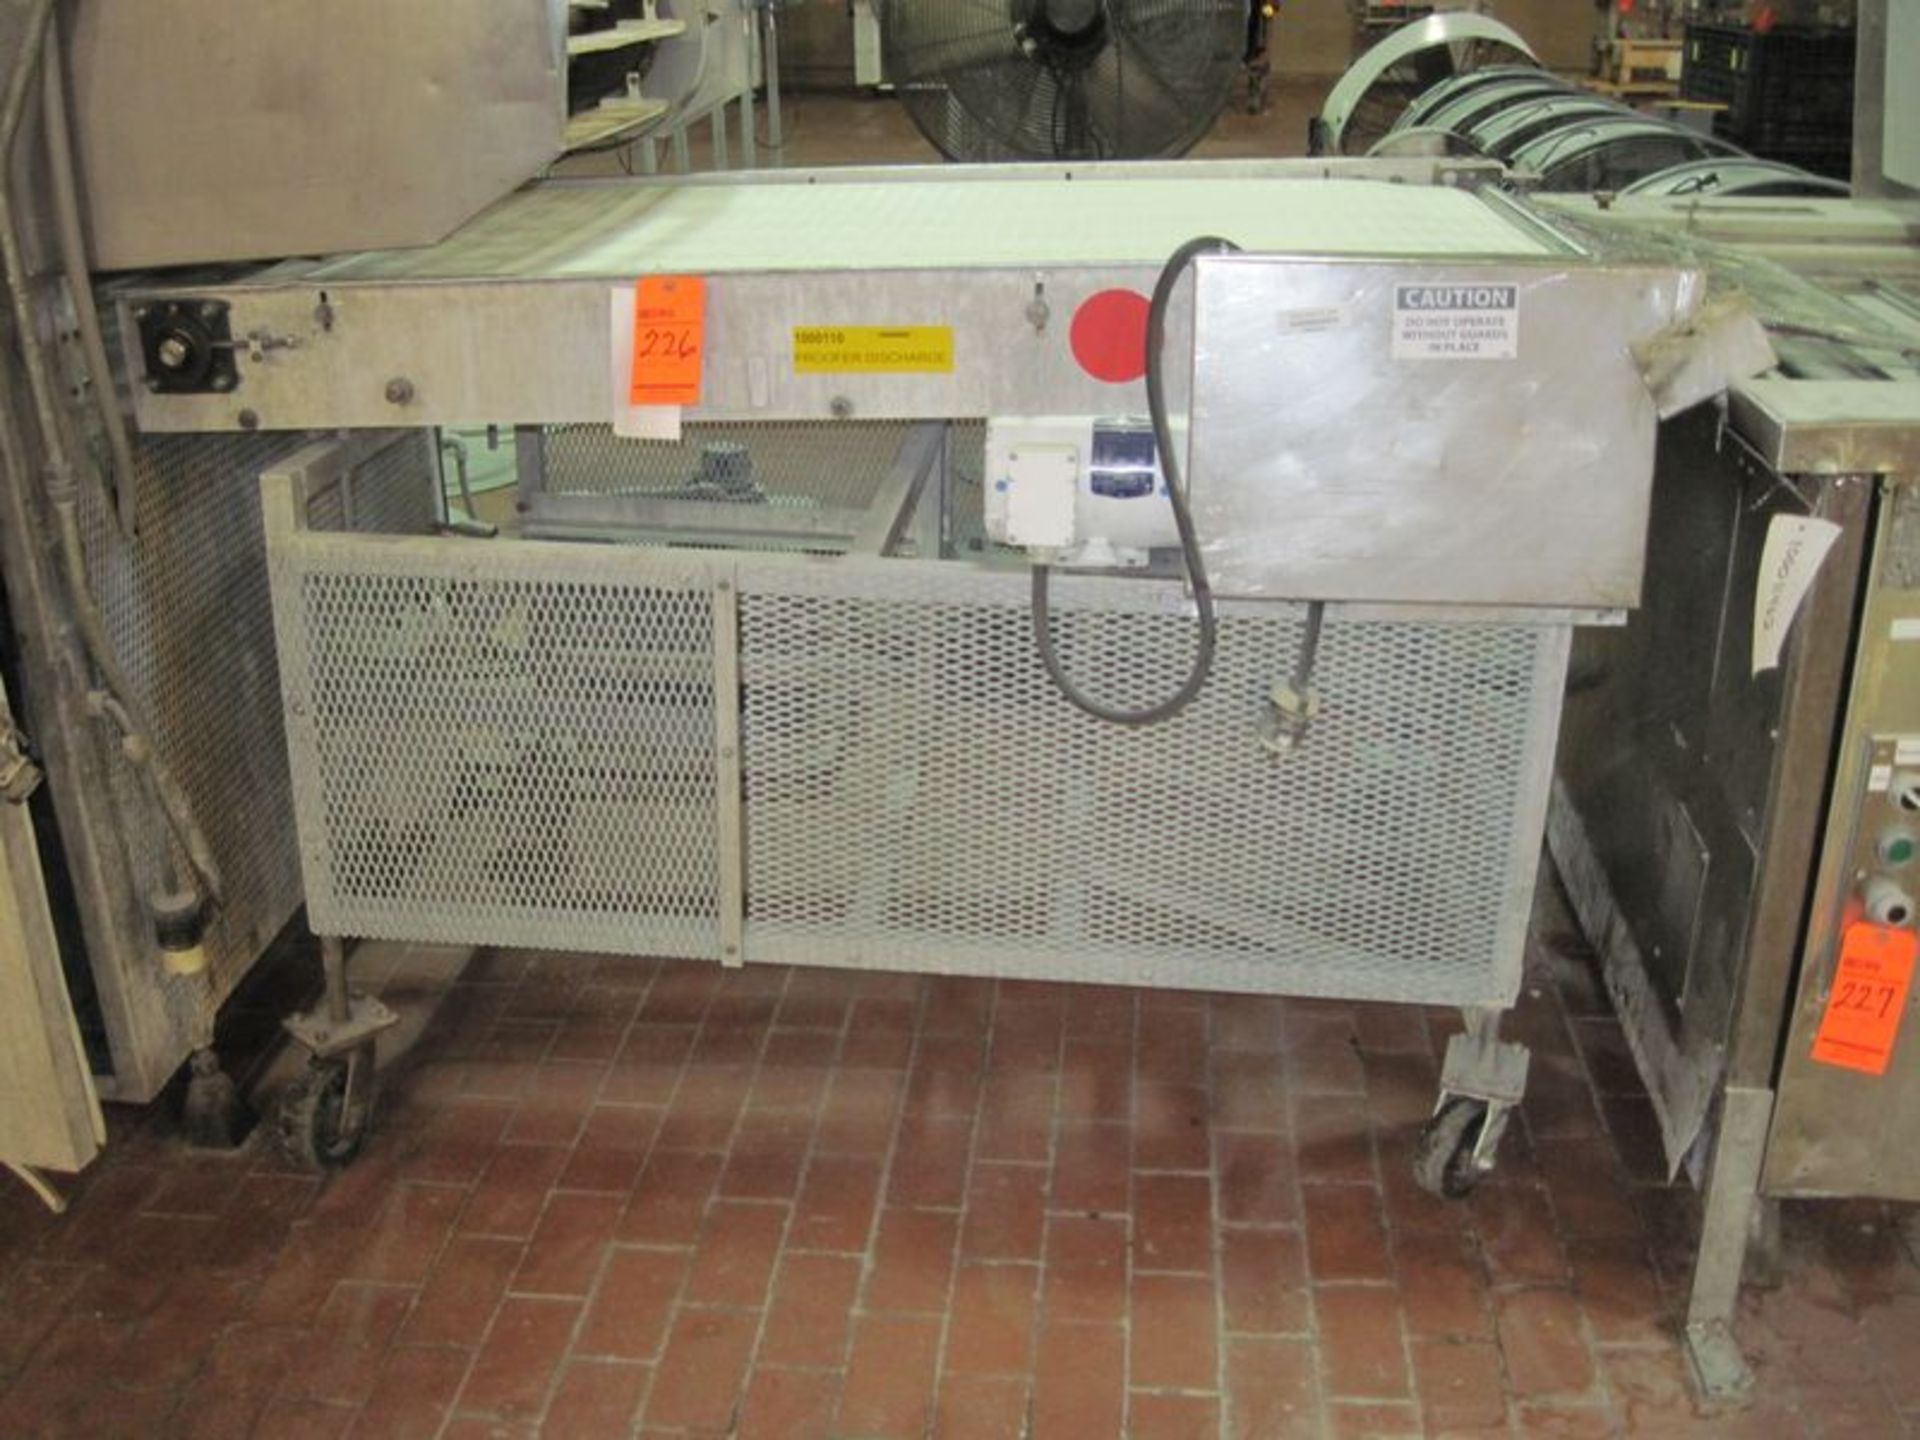 Plastic belt conveyor. Approximate 36" wide x 60" long. With approximate 1hp gear motor, stainless